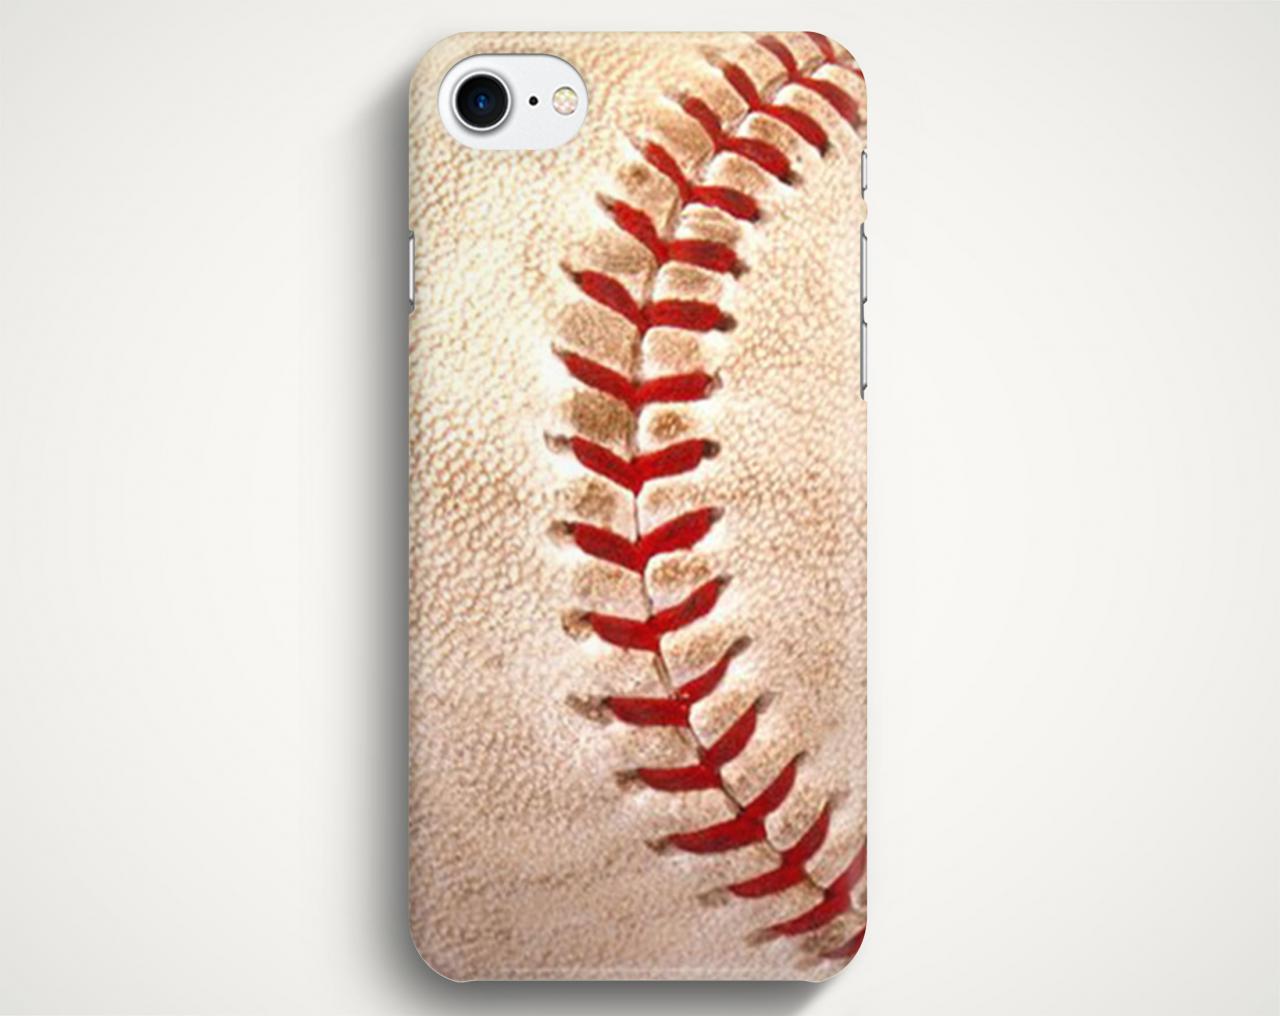 Baseball Case For Iphone 7 Iphone 7 Plus Samsung Galaxy S8 Galaxy S7 Galaxy A3 Galaxy A5 Galaxy A7 Lg G6 Lg G5 Htc 10